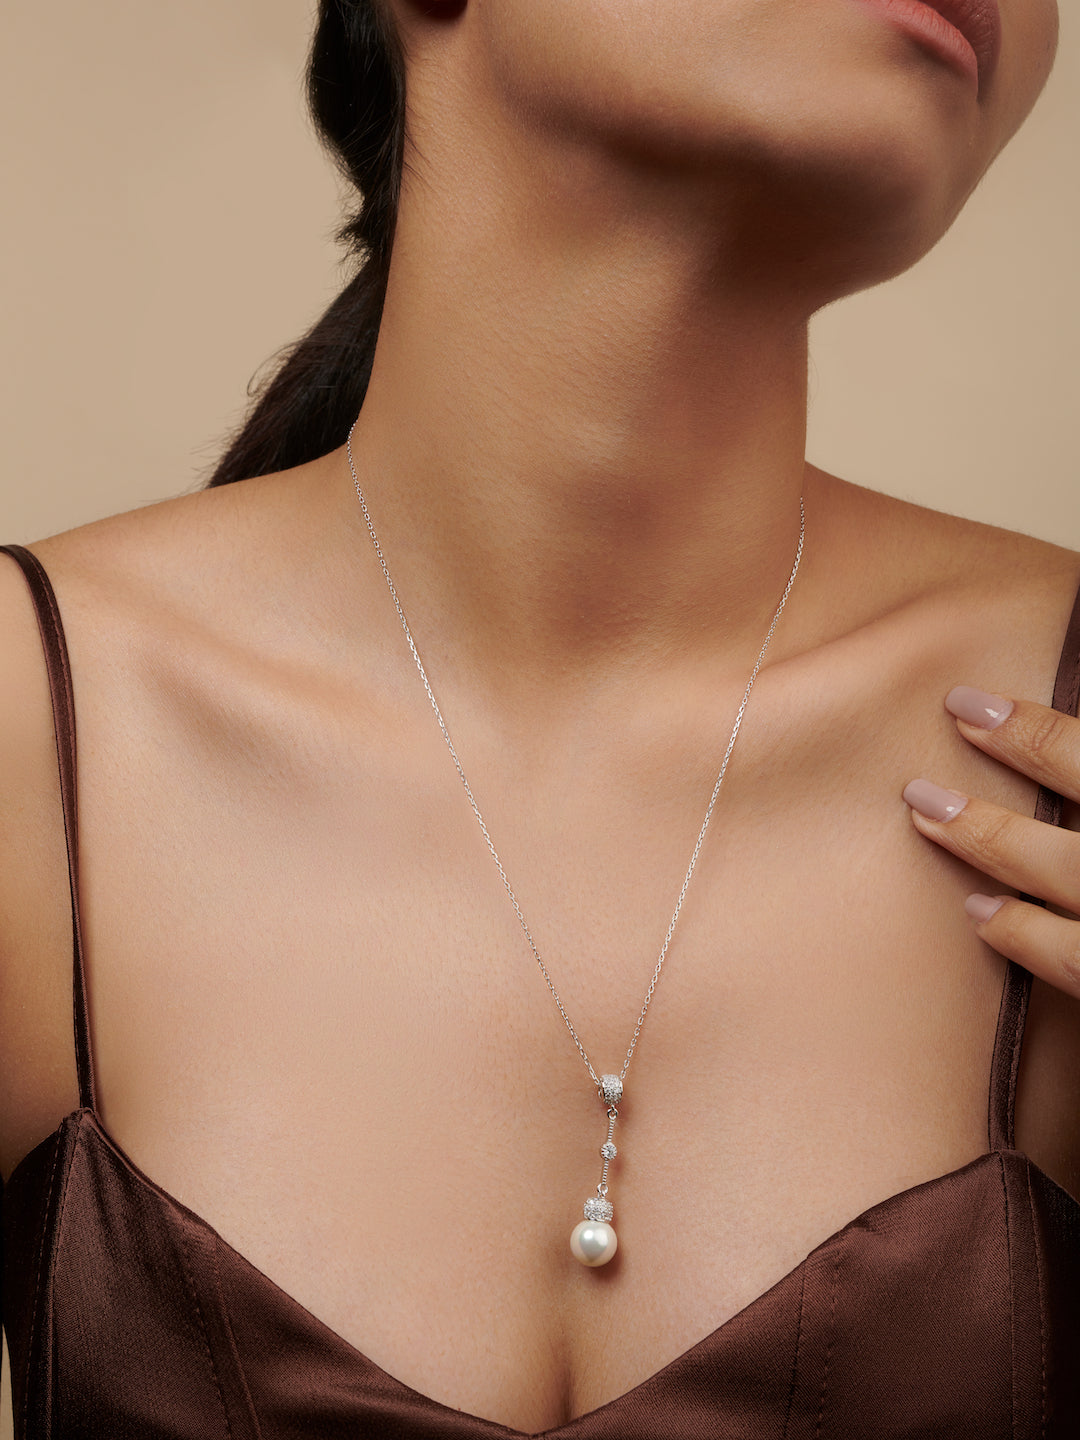 Pure Silver Streak Of Pearl Drop Necklaces Embellished With Cubic Zirconia Stones 